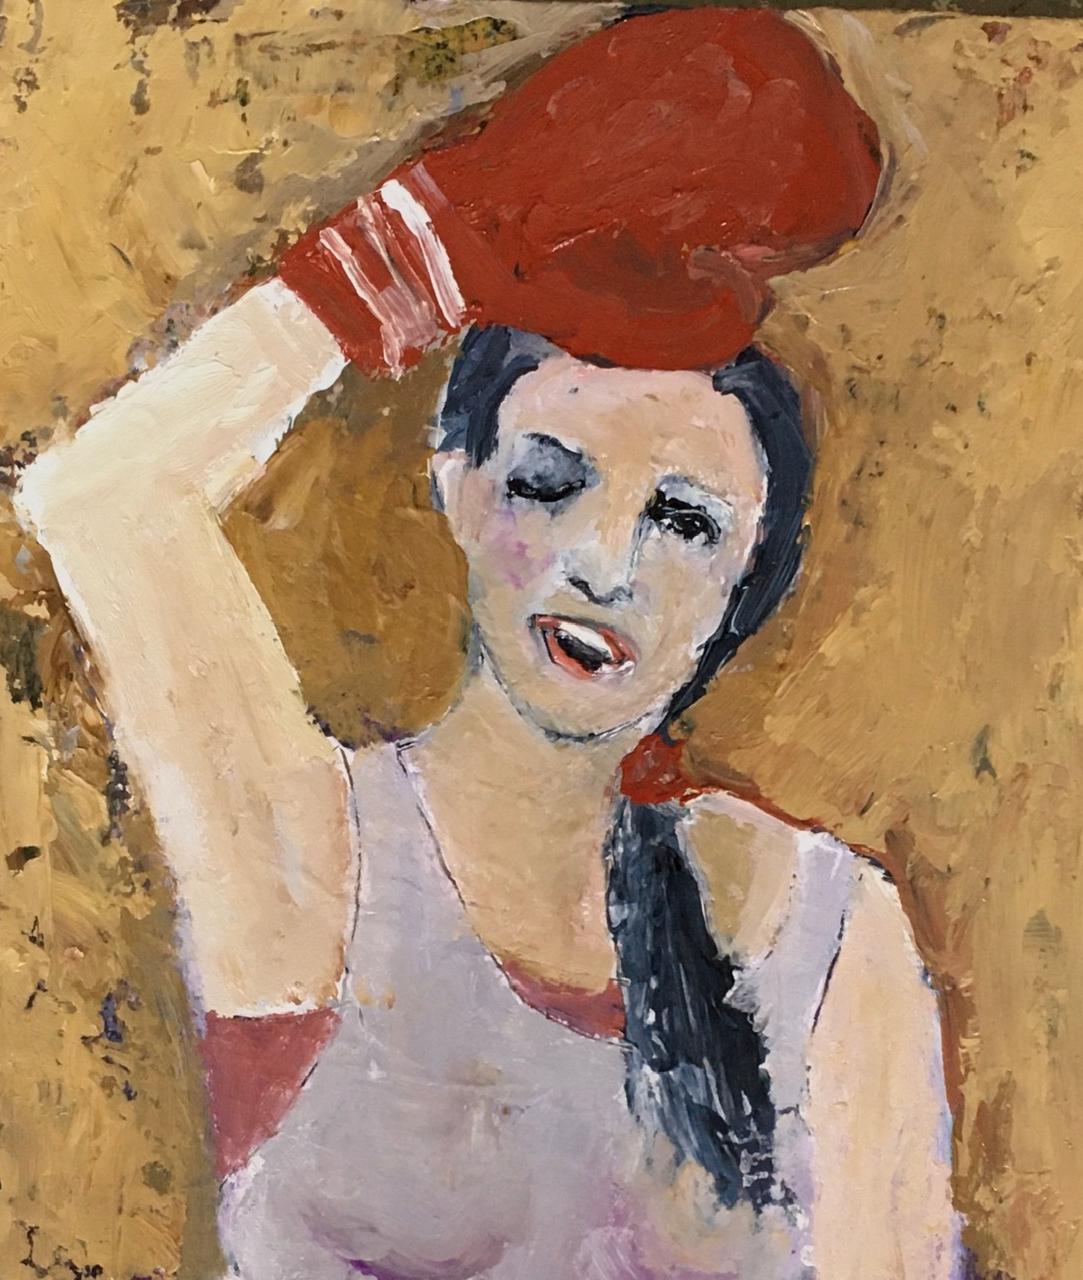 You Should Have seen the Other Gal By Jeanie Tomanek ist ein 8 